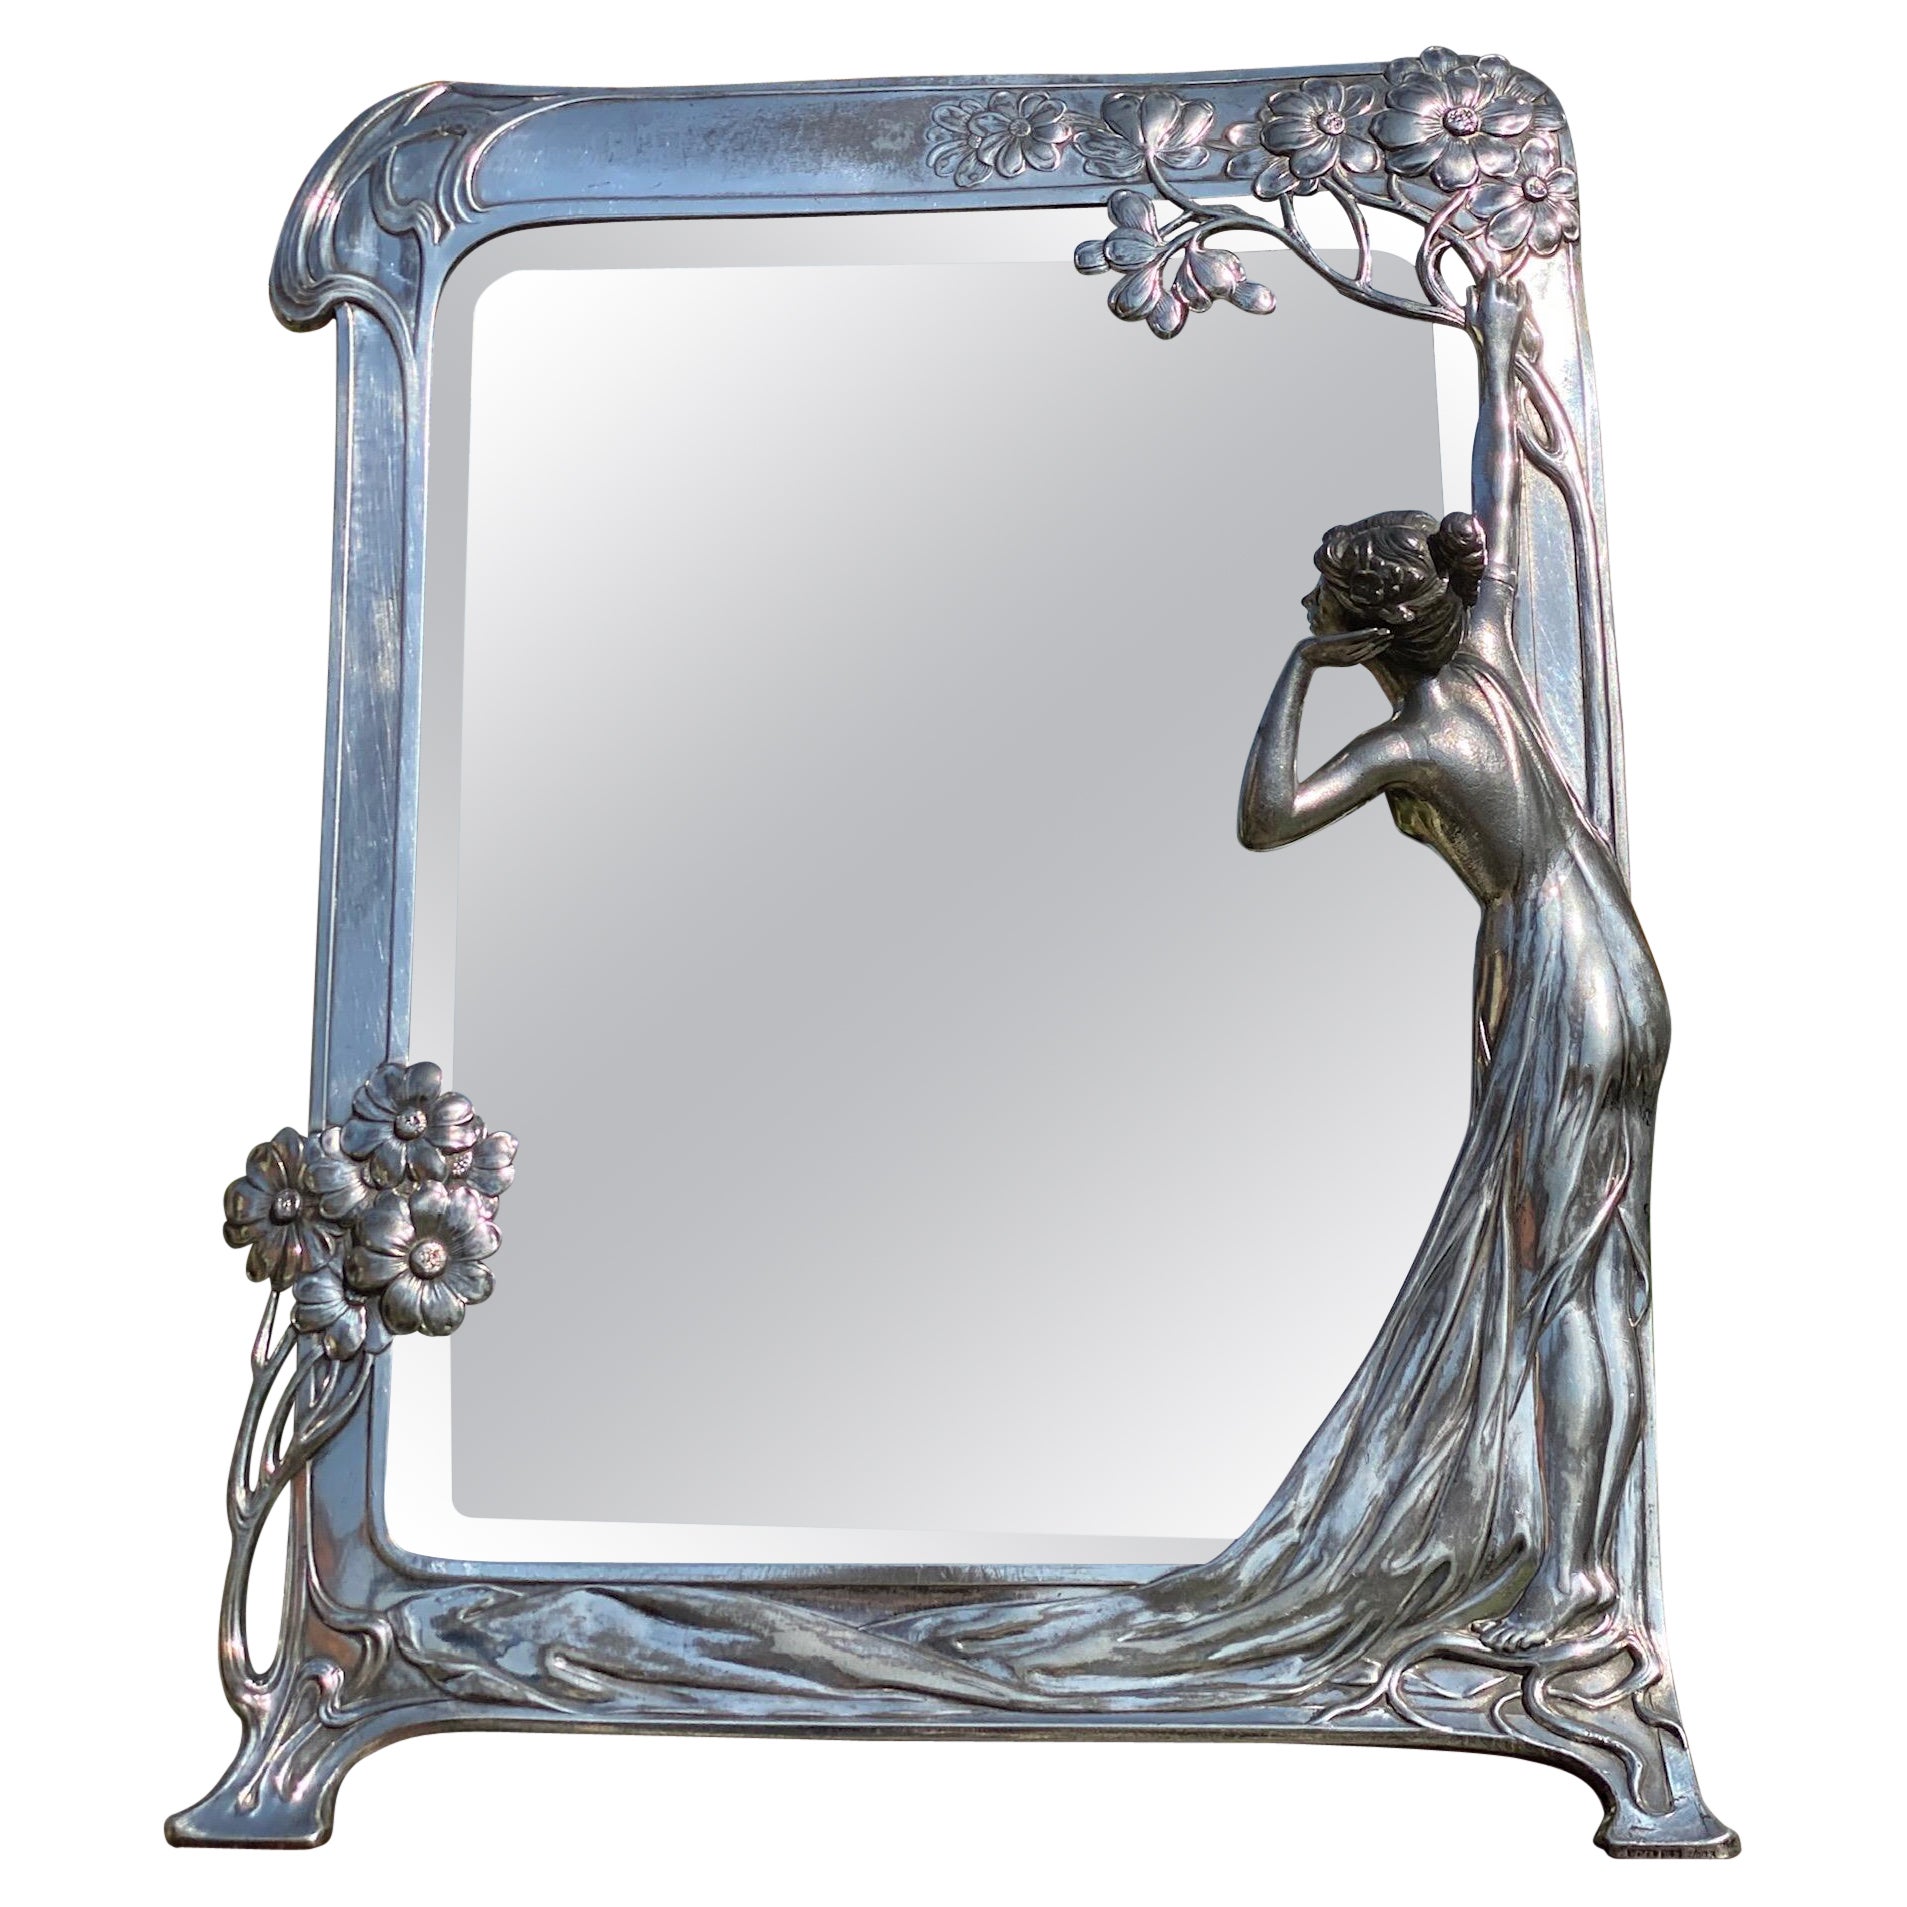 WMF Jugendstil, Art Nouveau Table Mirror, 'The First Cuckoo', EP, c. 1906 For Sale